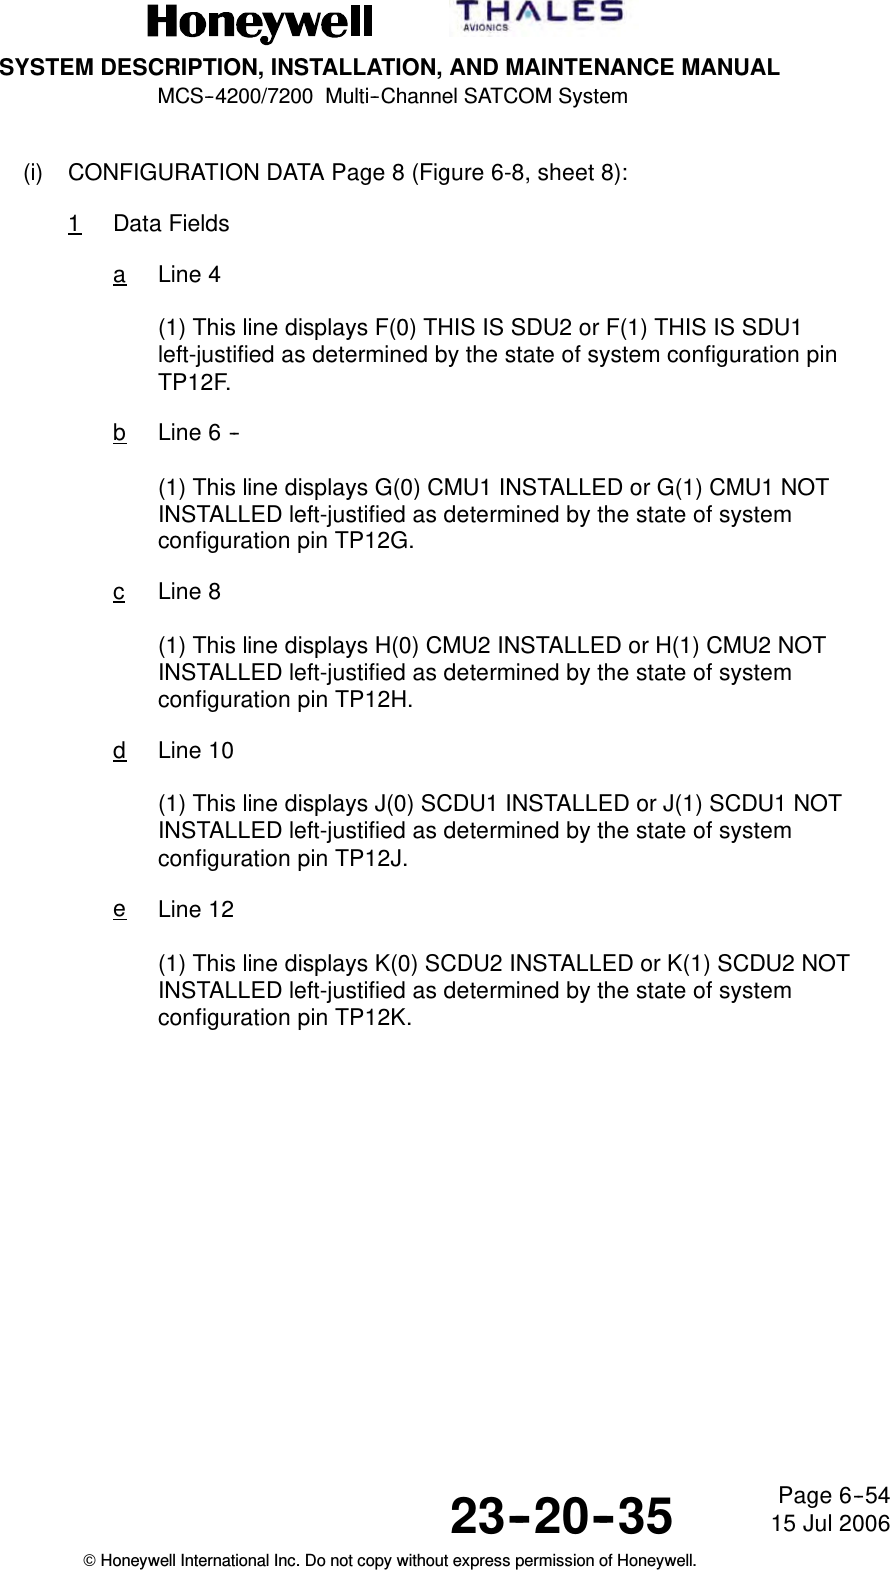 SYSTEM DESCRIPTION, INSTALLATION, AND MAINTENANCE MANUALMCS--4200/7200 Multi--Channel SATCOM System23--20--35 15 Jul 2006Honeywell International Inc. Do not copy without express permission of Honeywell.Page 6--54(i) CONFIGURATION DATA Page 8 (Figure 6-8, sheet 8):1Data FieldsaLine 4(1) This line displays F(0) THIS IS SDU2 or F(1) THIS IS SDU1left-justified as determined by the state of system configuration pinTP12F.bLine 6 --(1) This line displays G(0) CMU1 INSTALLED or G(1) CMU1 NOTINSTALLED left-justified as determined by the state of systemconfiguration pin TP12G.cLine 8(1) This line displays H(0) CMU2 INSTALLED or H(1) CMU2 NOTINSTALLED left-justified as determined by the state of systemconfiguration pin TP12H.dLine 10(1) This line displays J(0) SCDU1 INSTALLED or J(1) SCDU1 NOTINSTALLED left-justified as determined by the state of systemconfiguration pin TP12J.eLine 12(1) This line displays K(0) SCDU2 INSTALLED or K(1) SCDU2 NOTINSTALLED left-justified as determined by the state of systemconfiguration pin TP12K.